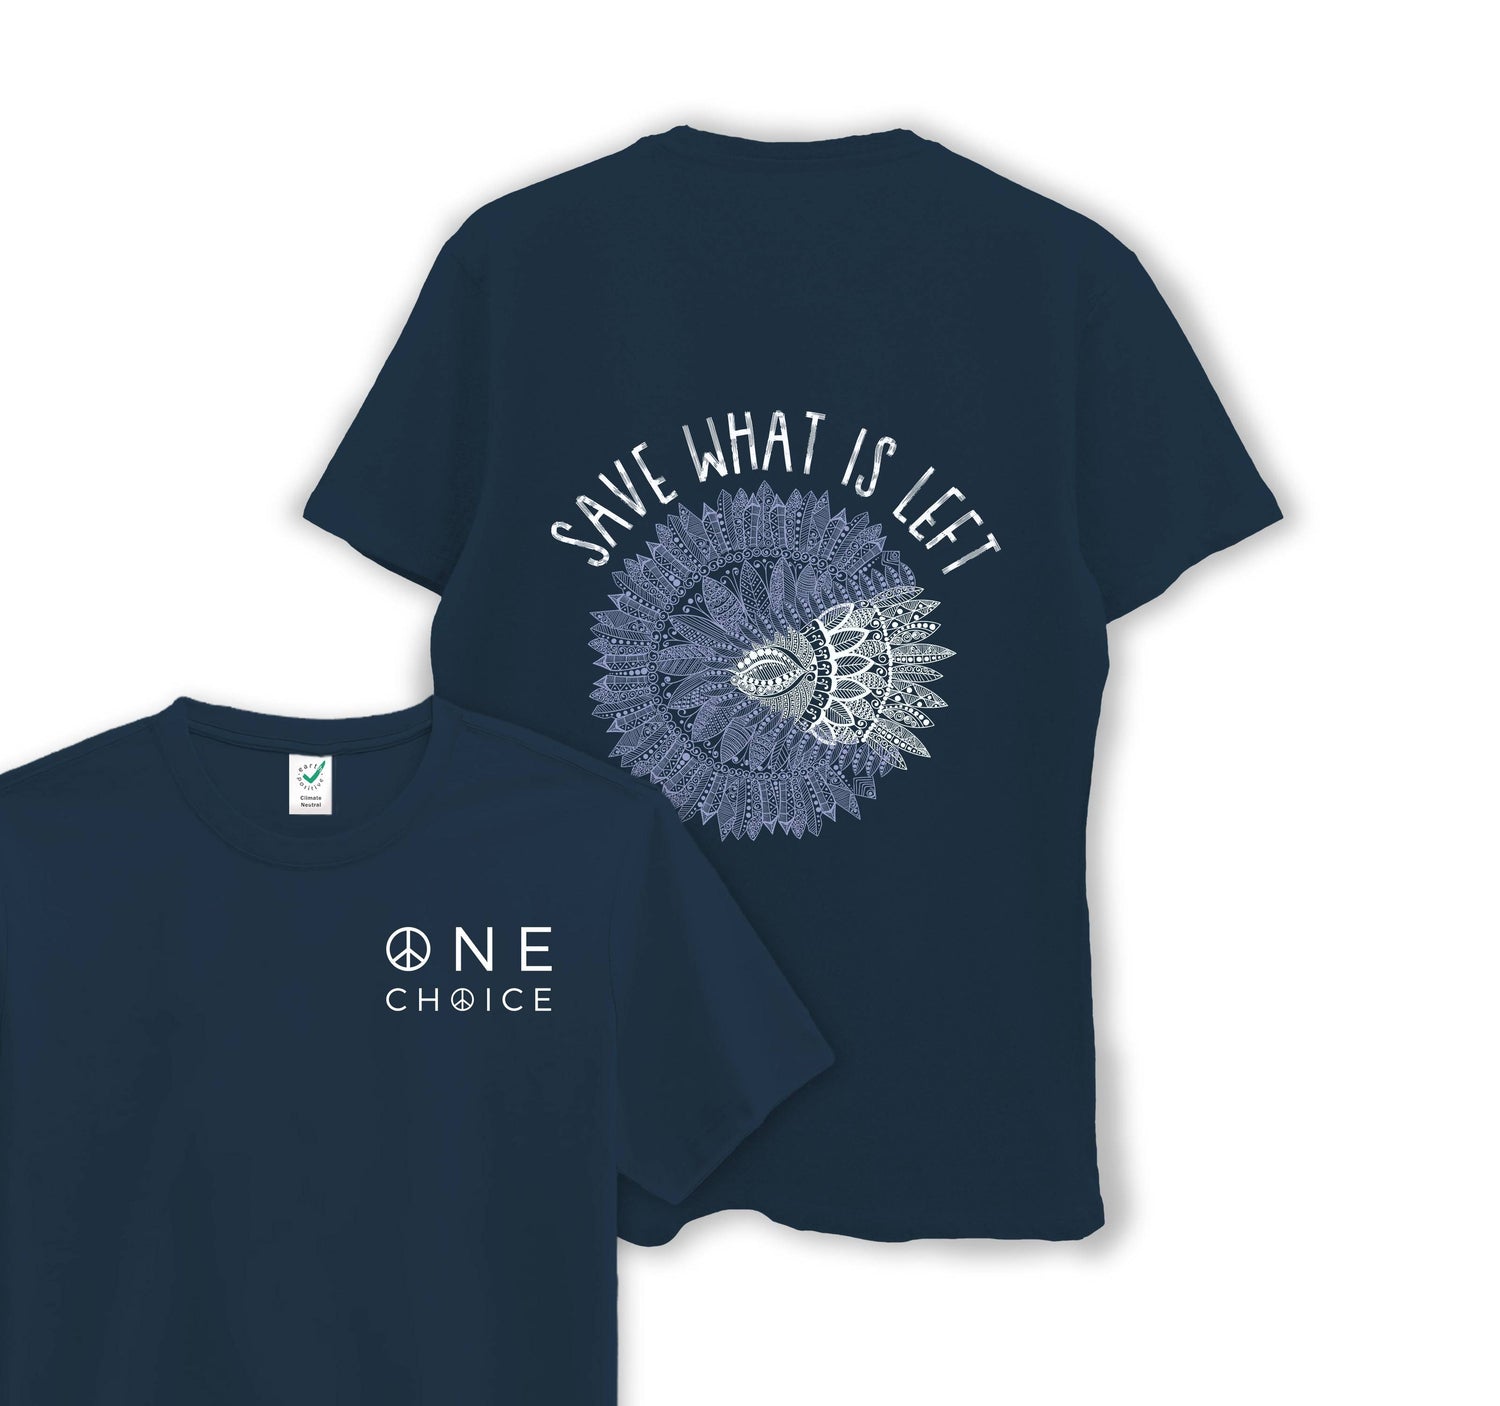 Save What Is Left - Organic Cotton Tee - One Choice Apparel